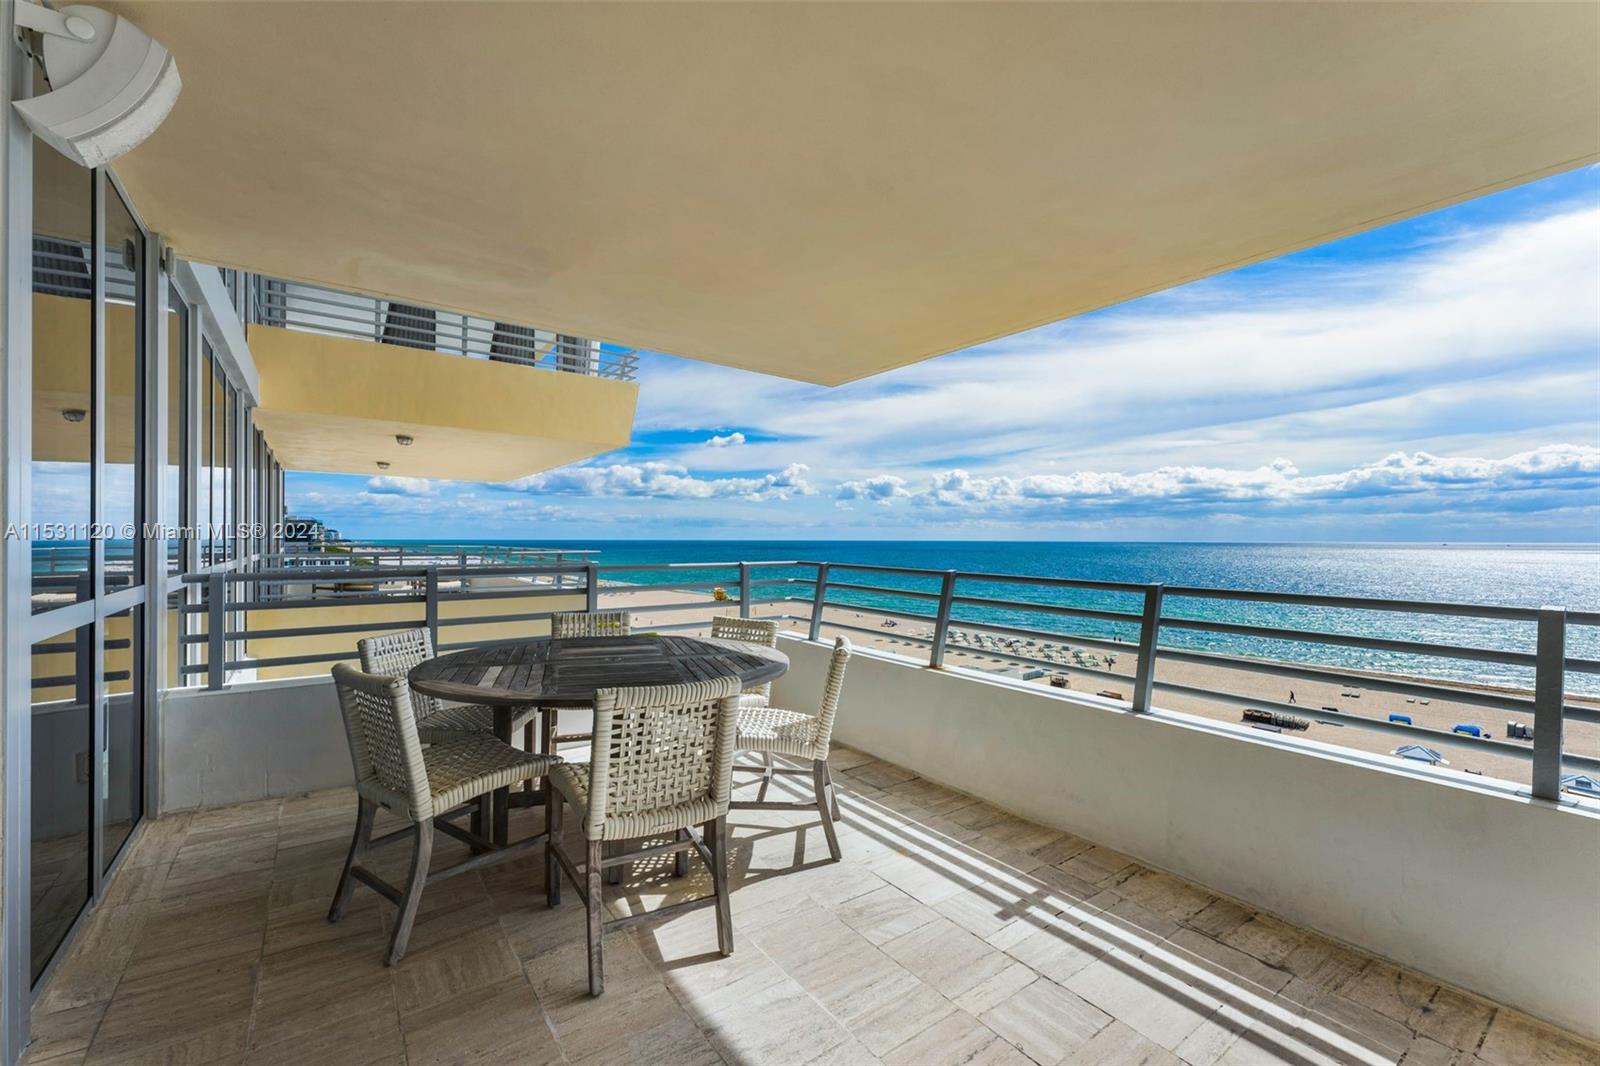 Stunning unit direct ocean facing in the heart of Miami Beach - the prestigious South of Fifth residential area. Best located unit in the building with two combined units 901-907, full front view of the ocean with a total of two separate balconies. A superb modern unit redesigned completely for comfort and for the luxury of a grandiose view and living space. The Hilton Bentley Miami Beach has wonderful amenities such as a fitness center, pool and beach facilities, rejuvenate at the asian Spa 101, attached to the Rocco Donna Hair Salon. Dine at Santorini by Georgios, offering authentic traditional and new age Greek flavors, or the prestigious Prime Italian Steakhouse. This gorgeous 3 bedroom has state of the art Miele appliances, including a washer/dryer.